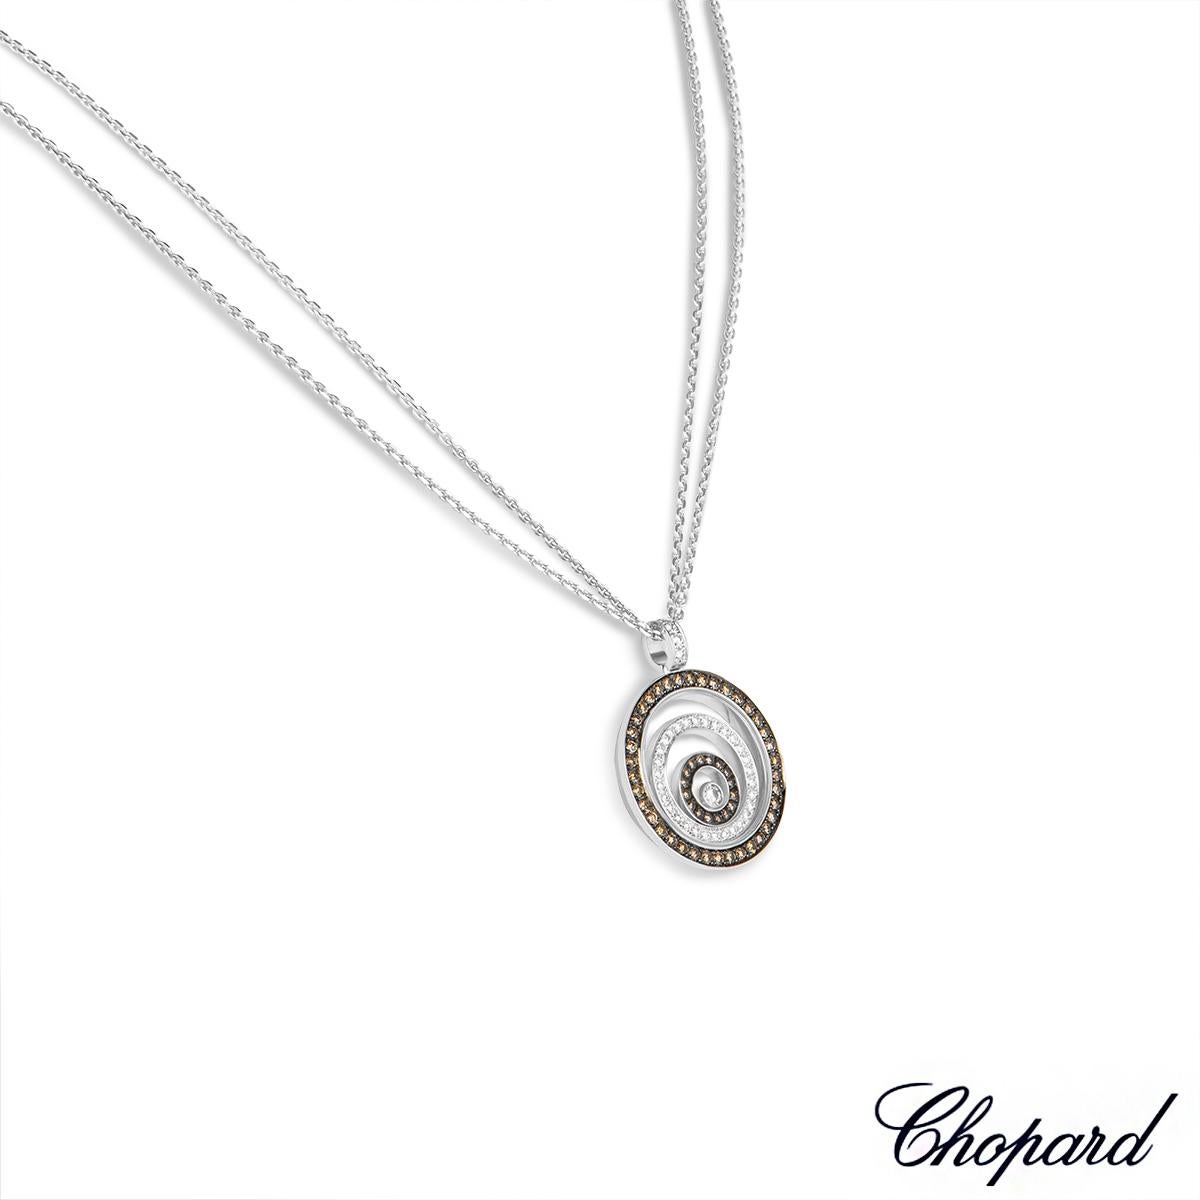 A stylish 18k white gold diamond pendant by Chopard from the Happy Spirit collection. The pendant features three graduating circular motifs set inside each other. The outer and inner circles are pave set with 54 round brilliant cut brown diamonds